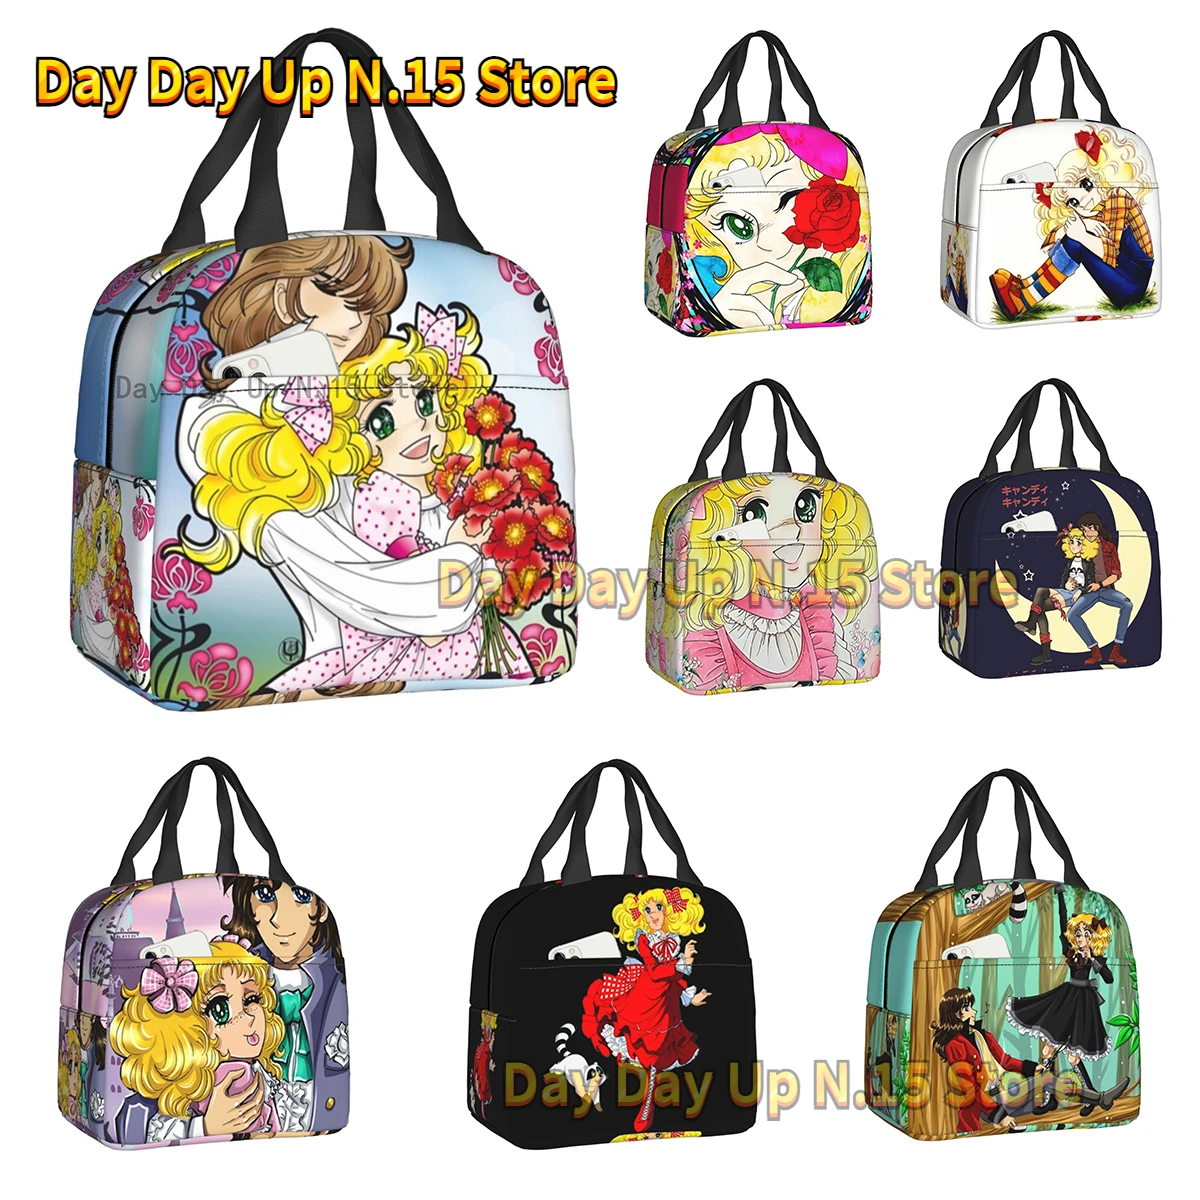 

Candy And Terence Insulated Lunch Bag for Women Waterproof Anime Manga Cooler Thermal Lunch Box Beach Camping Travel lunchbag